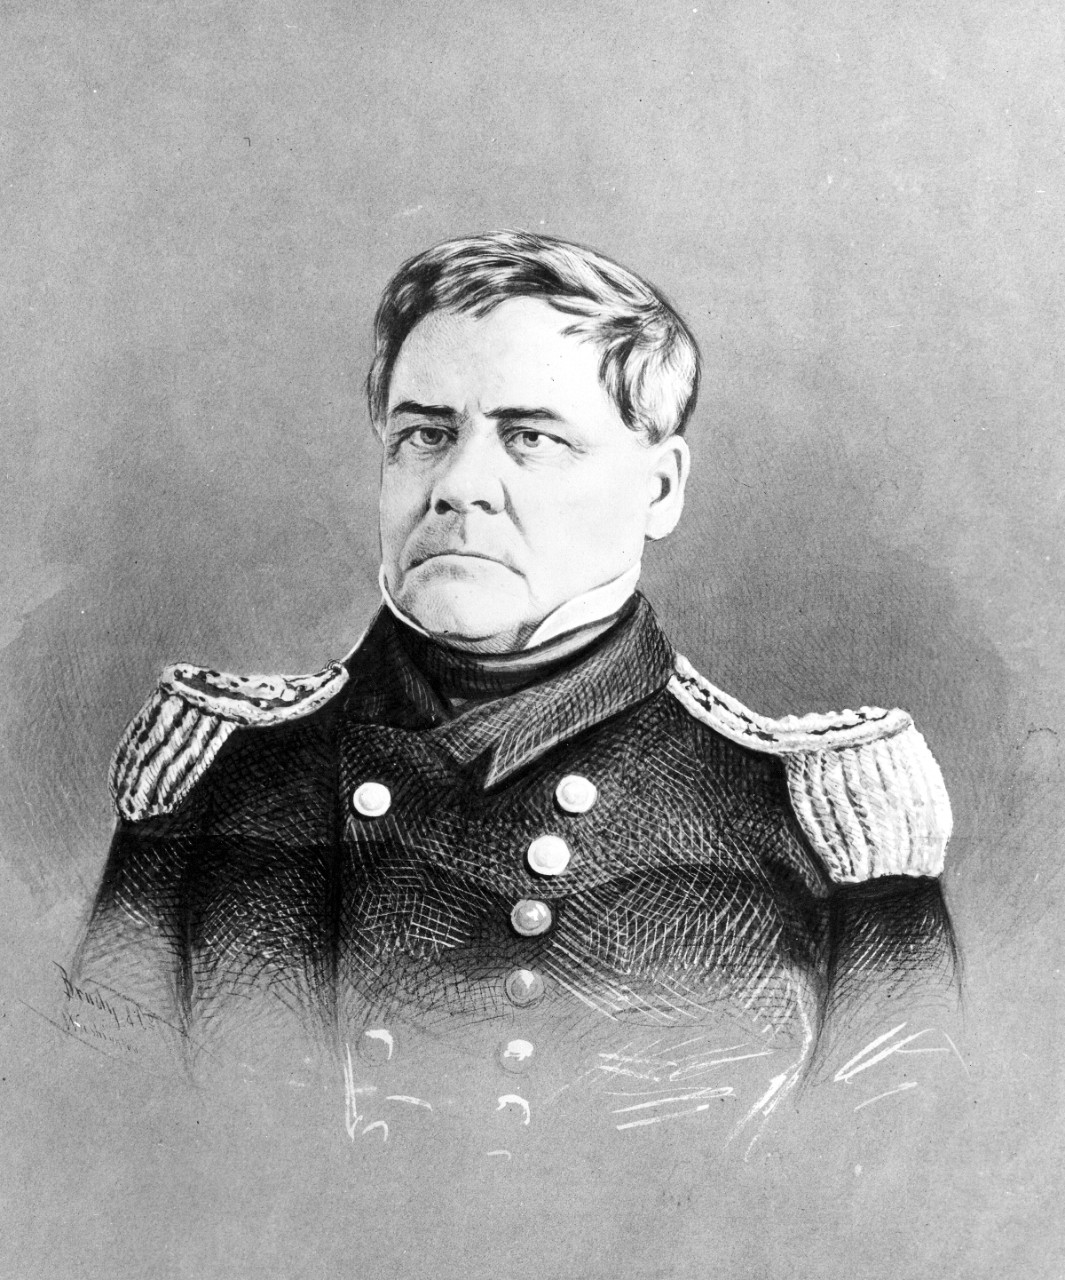 Commodore Lewis Warrington, the first Chief of the Bureau of Navy Yards and Docks. From 1826 to 1830, Commodore Warrington served as one of the three Navy Board commissioners, a body charged with the administration of naval affairs. Afterwards, Warrington returned to the Norfolk Navy Yard to serve as commandant. In 1840, the Navy reassigned to Washington to serve for another two years as commissioner on the Navy Board. After the Navy reorganized the department in 1842, Warrington became first Chief of the Bureau of Navy Yards and Docks.